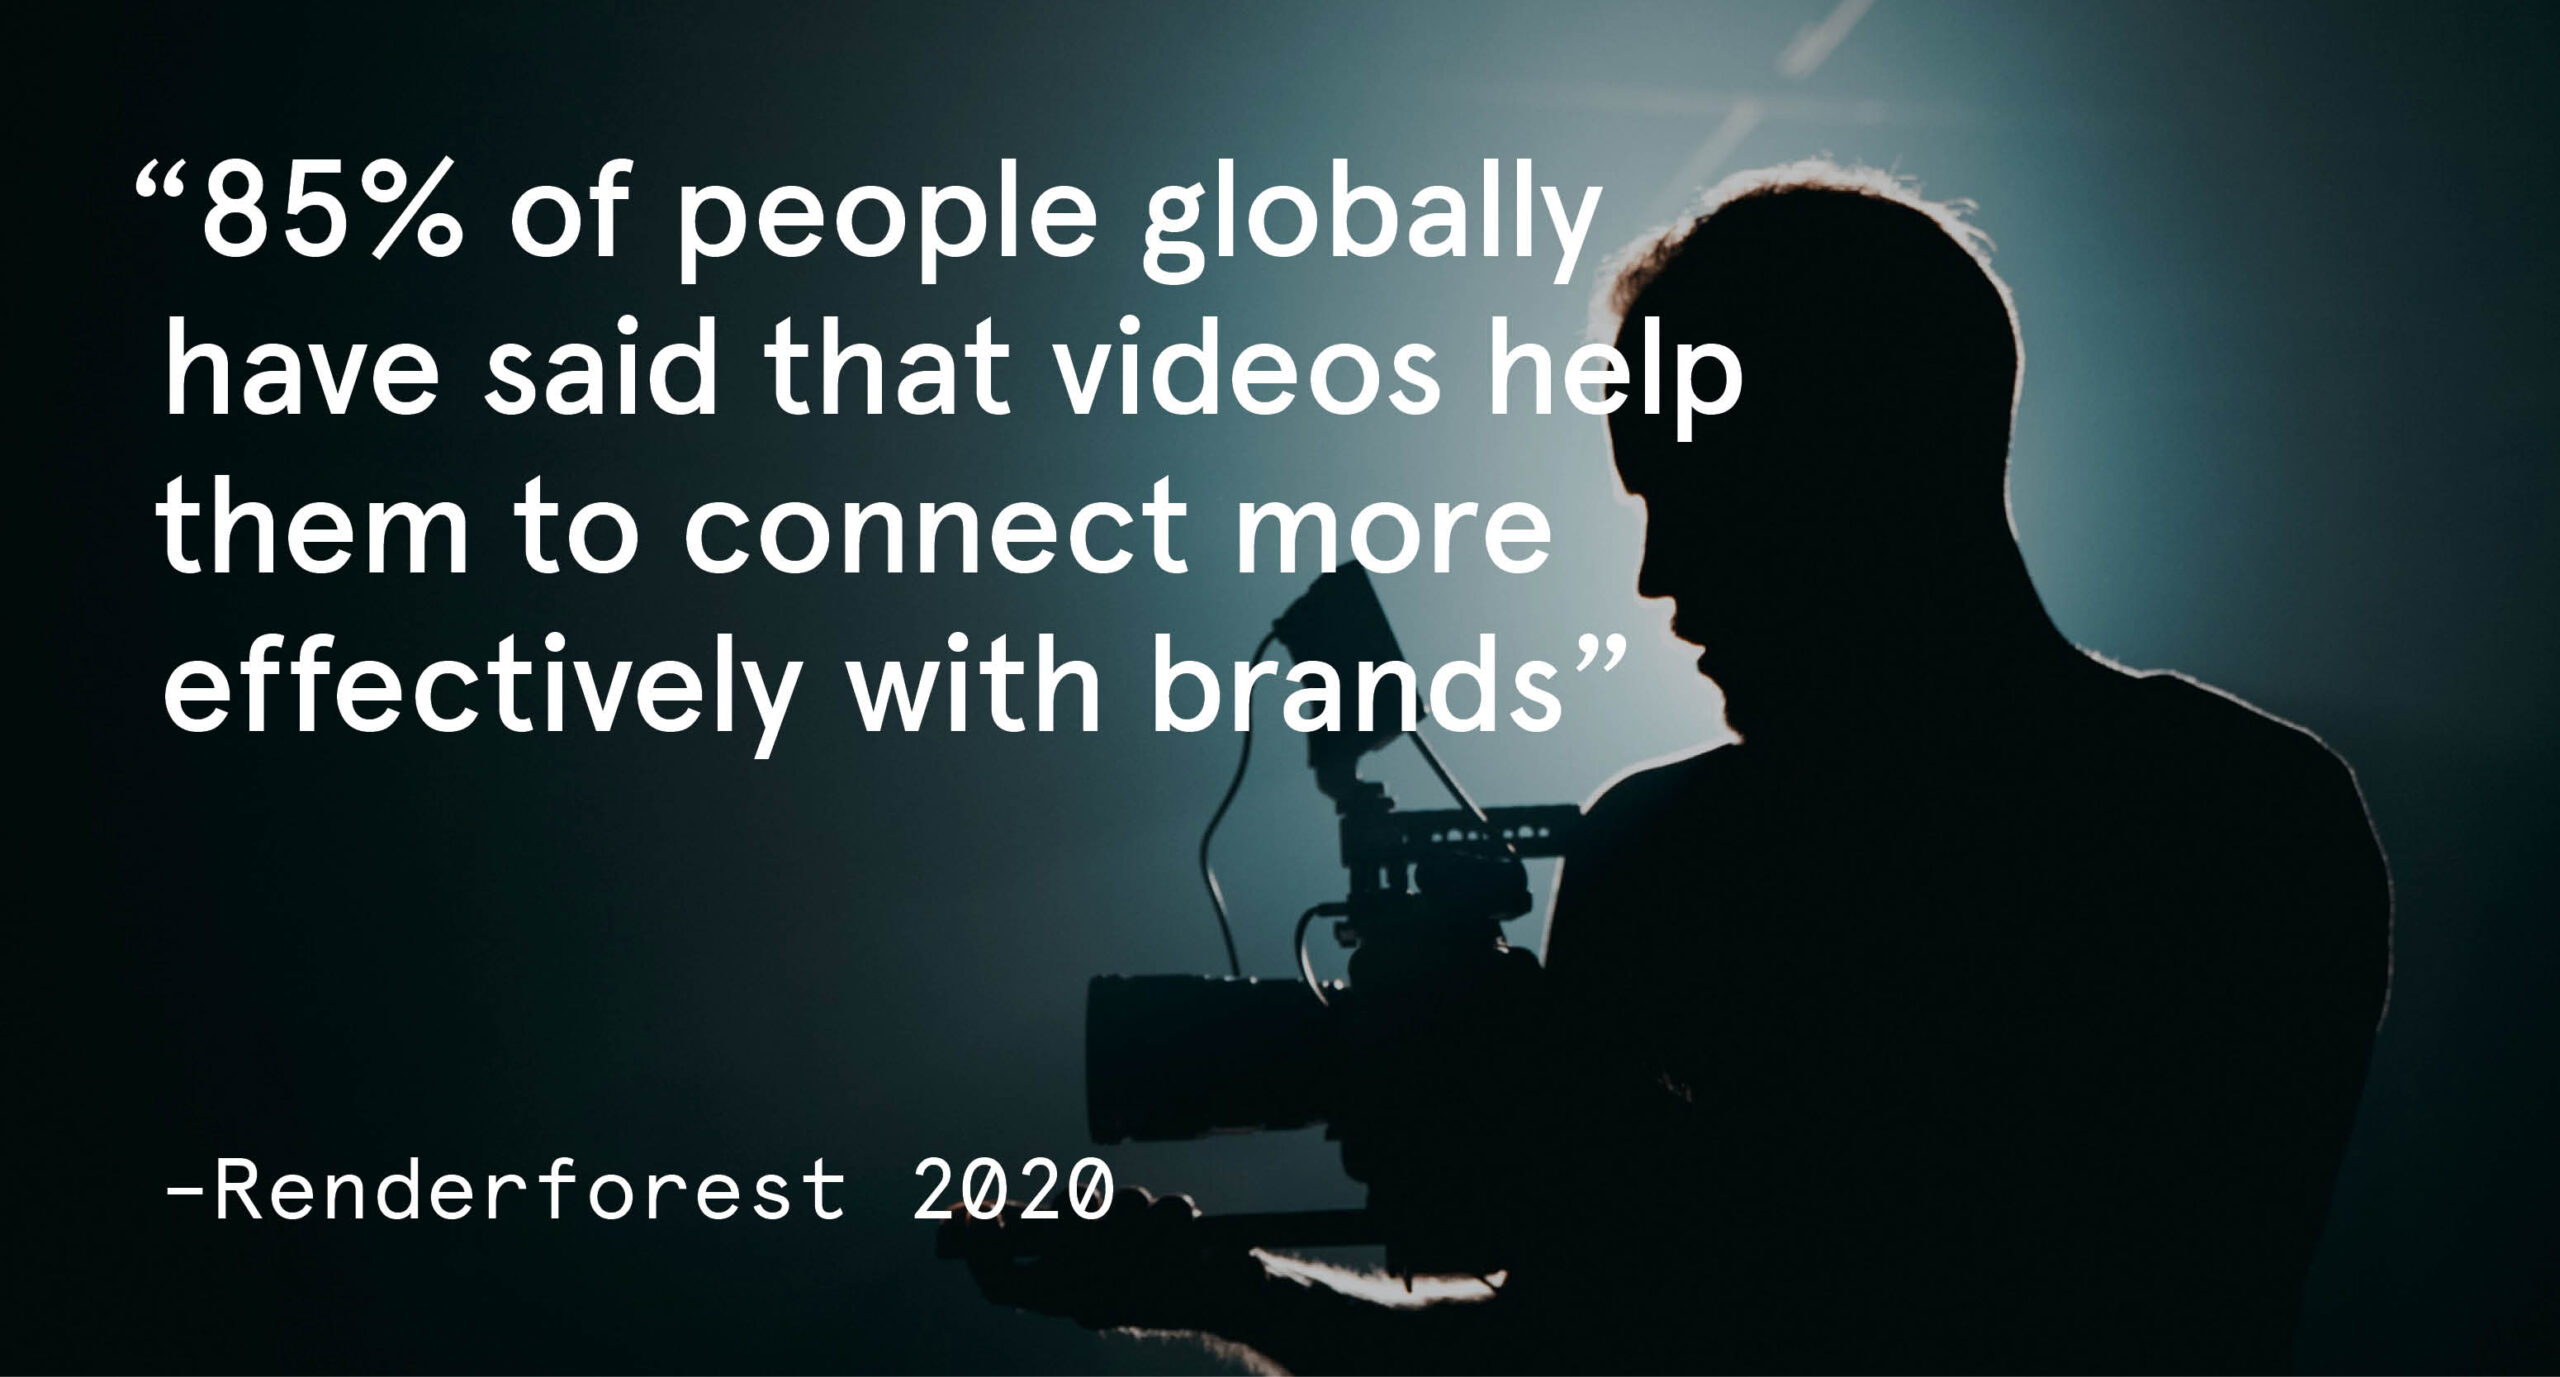 85% of people globally have said that videos help them to connect more effectively with brands (Renderforest, 2020).